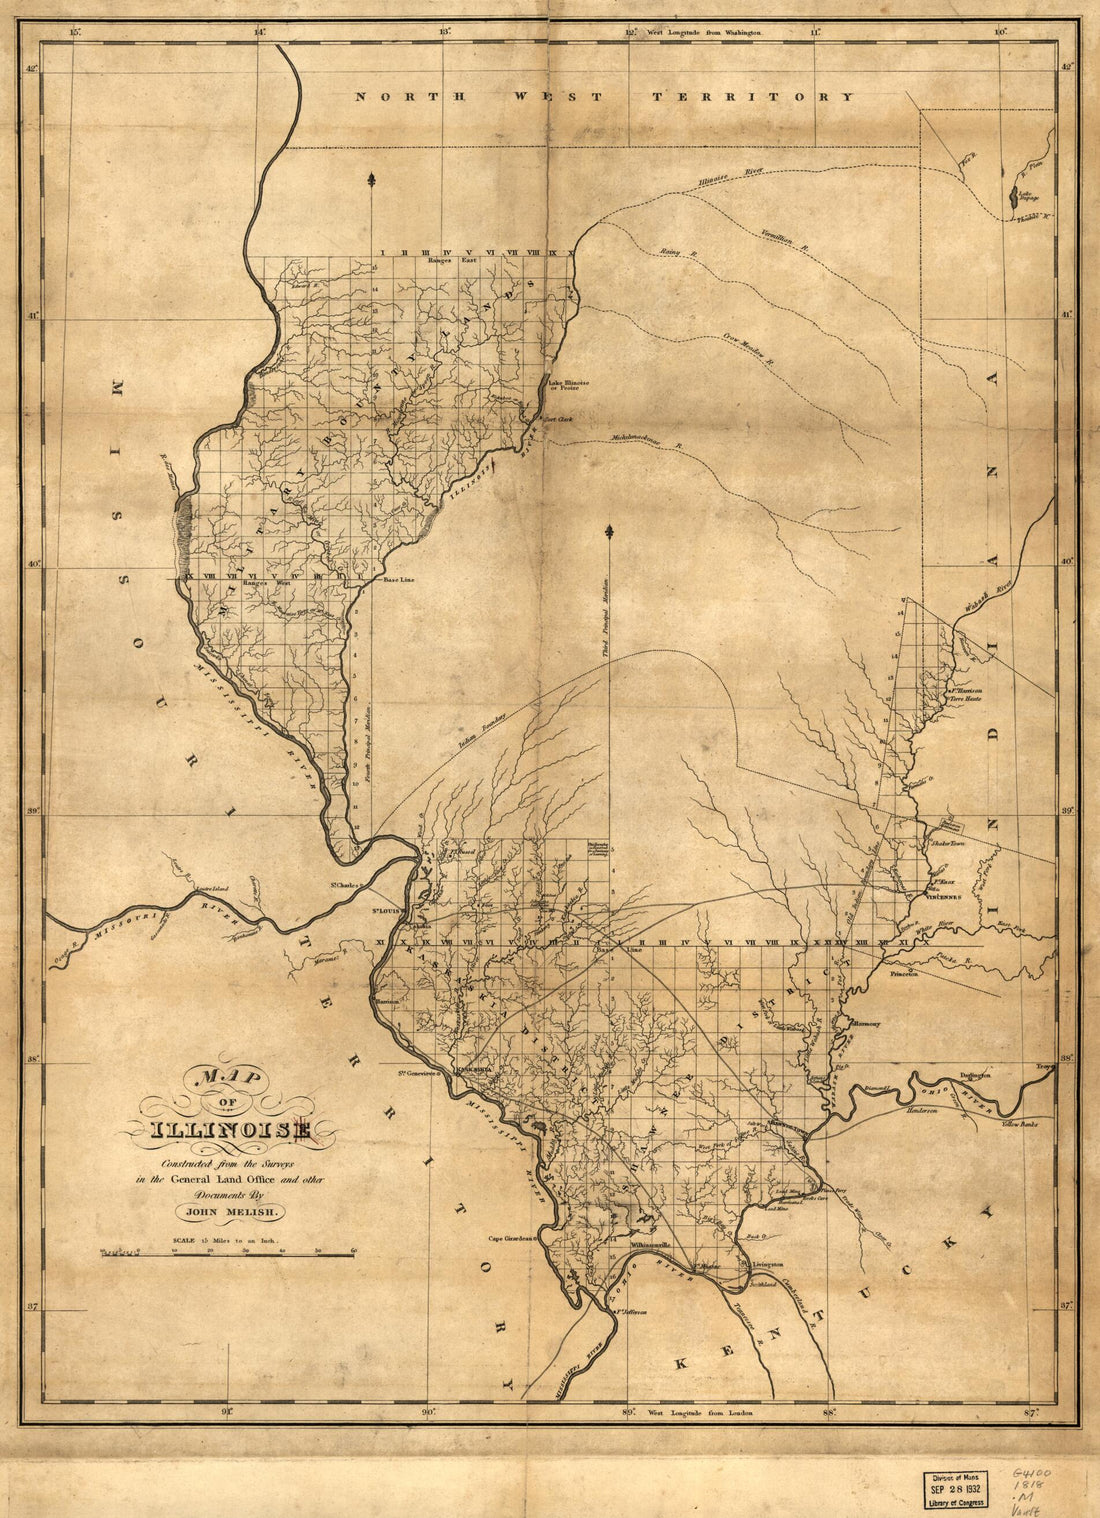 This old map of Map of Illinoise sic (Map of Illinois) from 1818 was created by John Melish in 1818